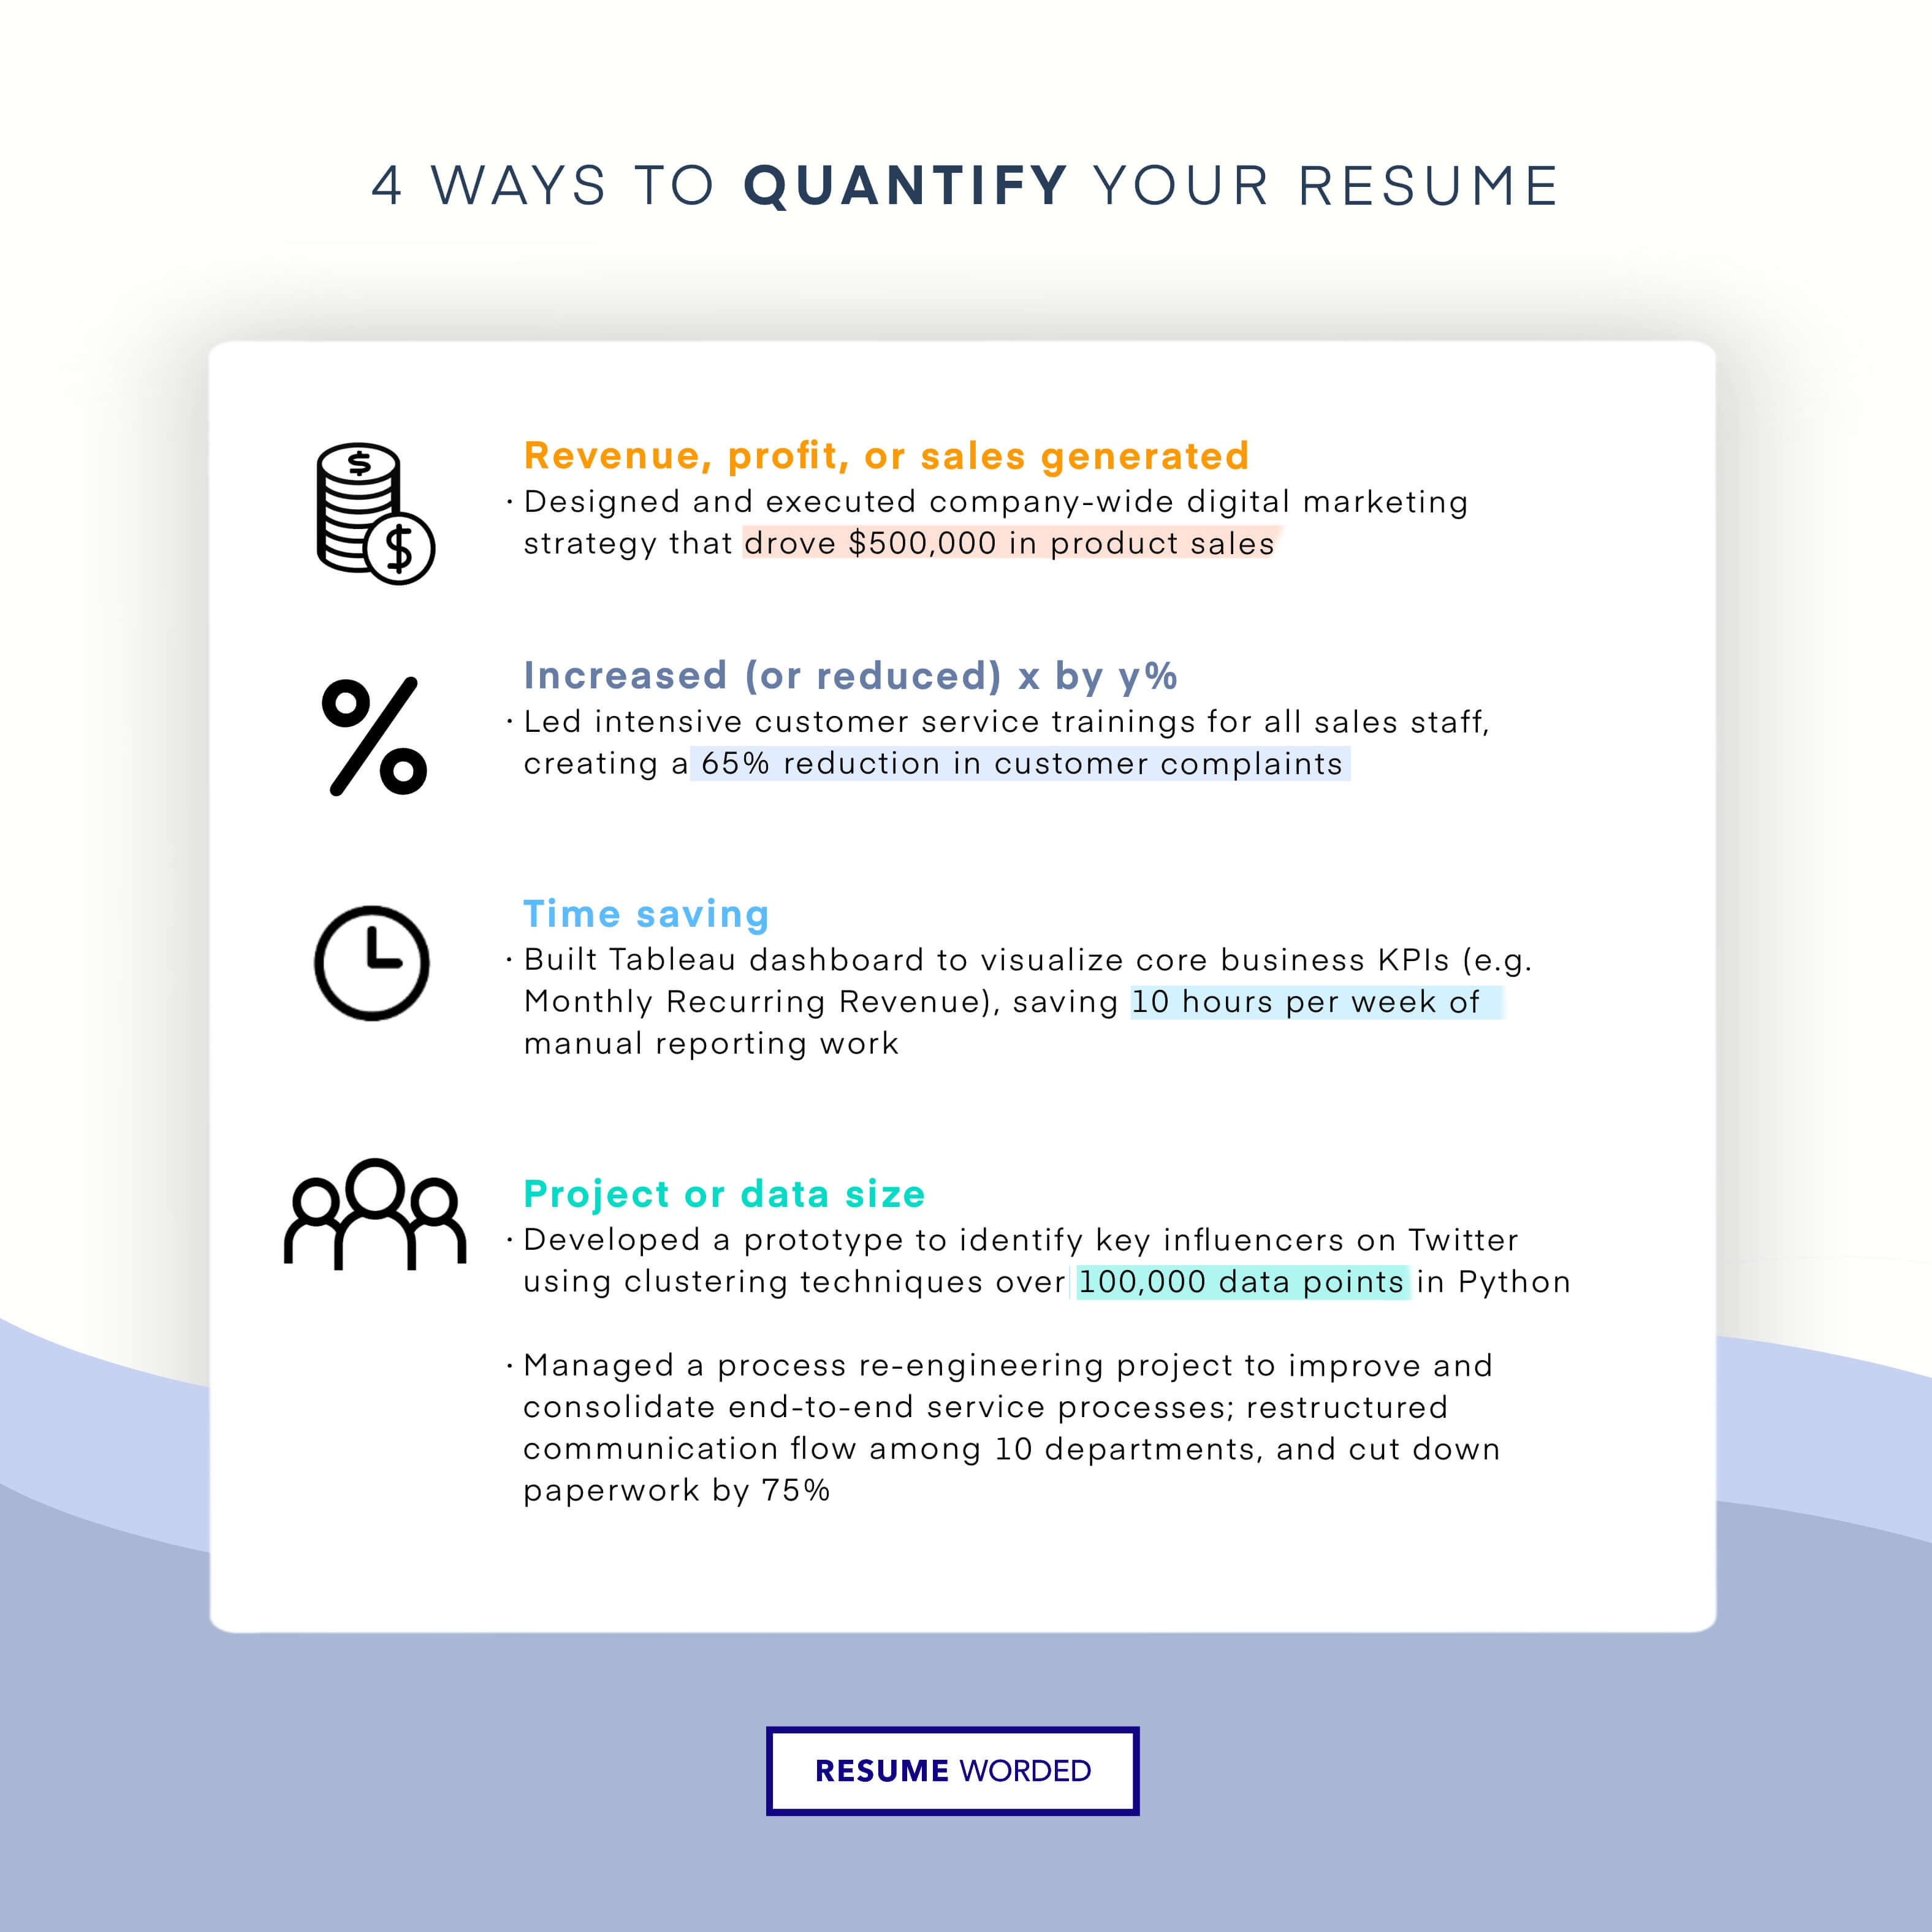 Quantify your workload capabilities. - Customer Service Agent Resume